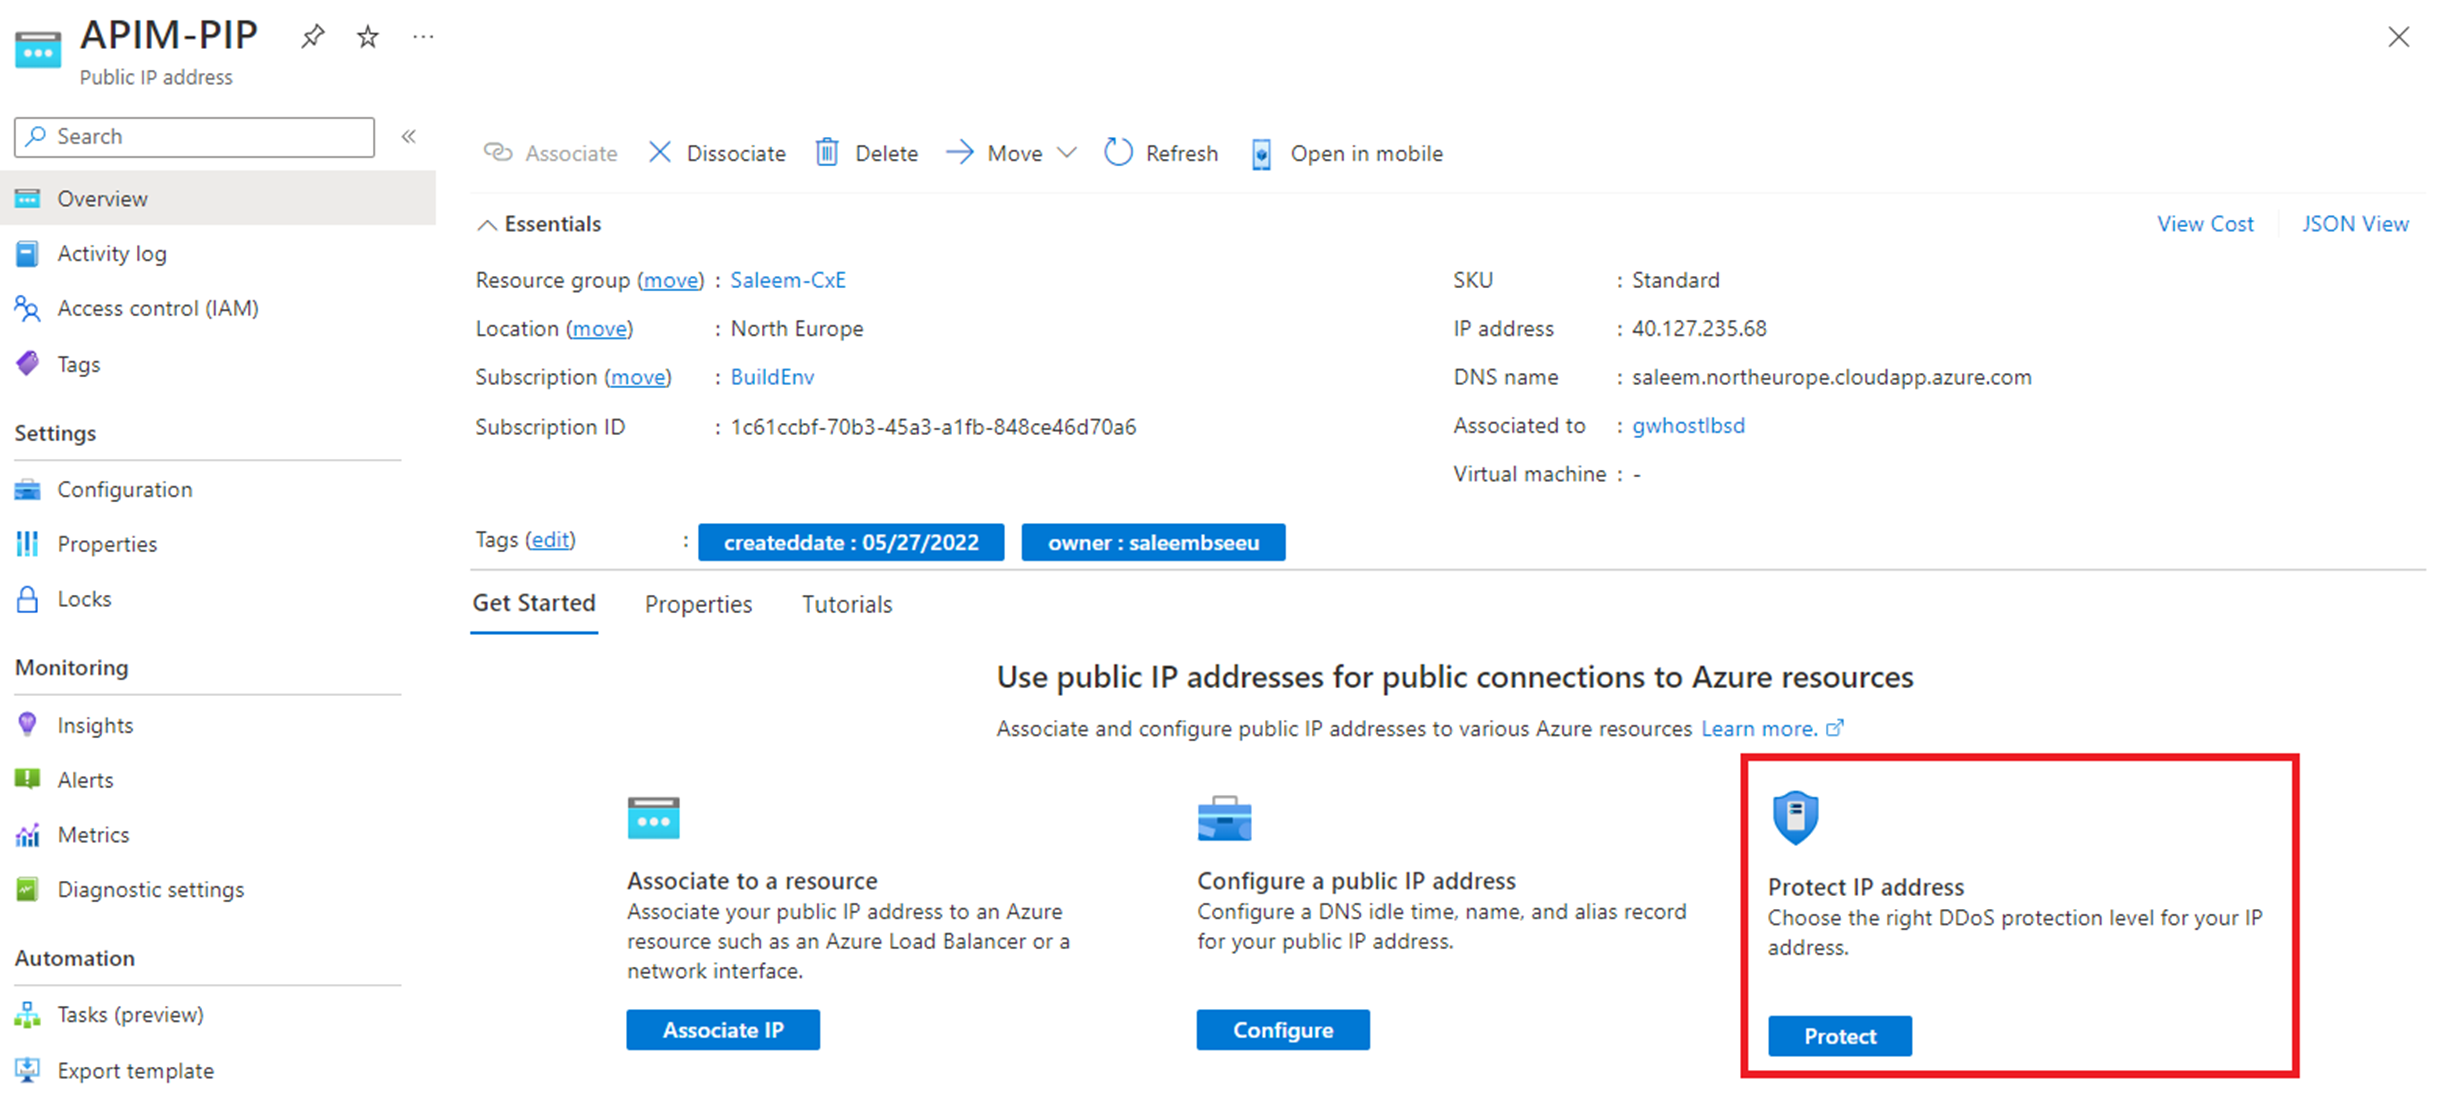 Azure DDoS IP Protection is Now Available in Public Preview